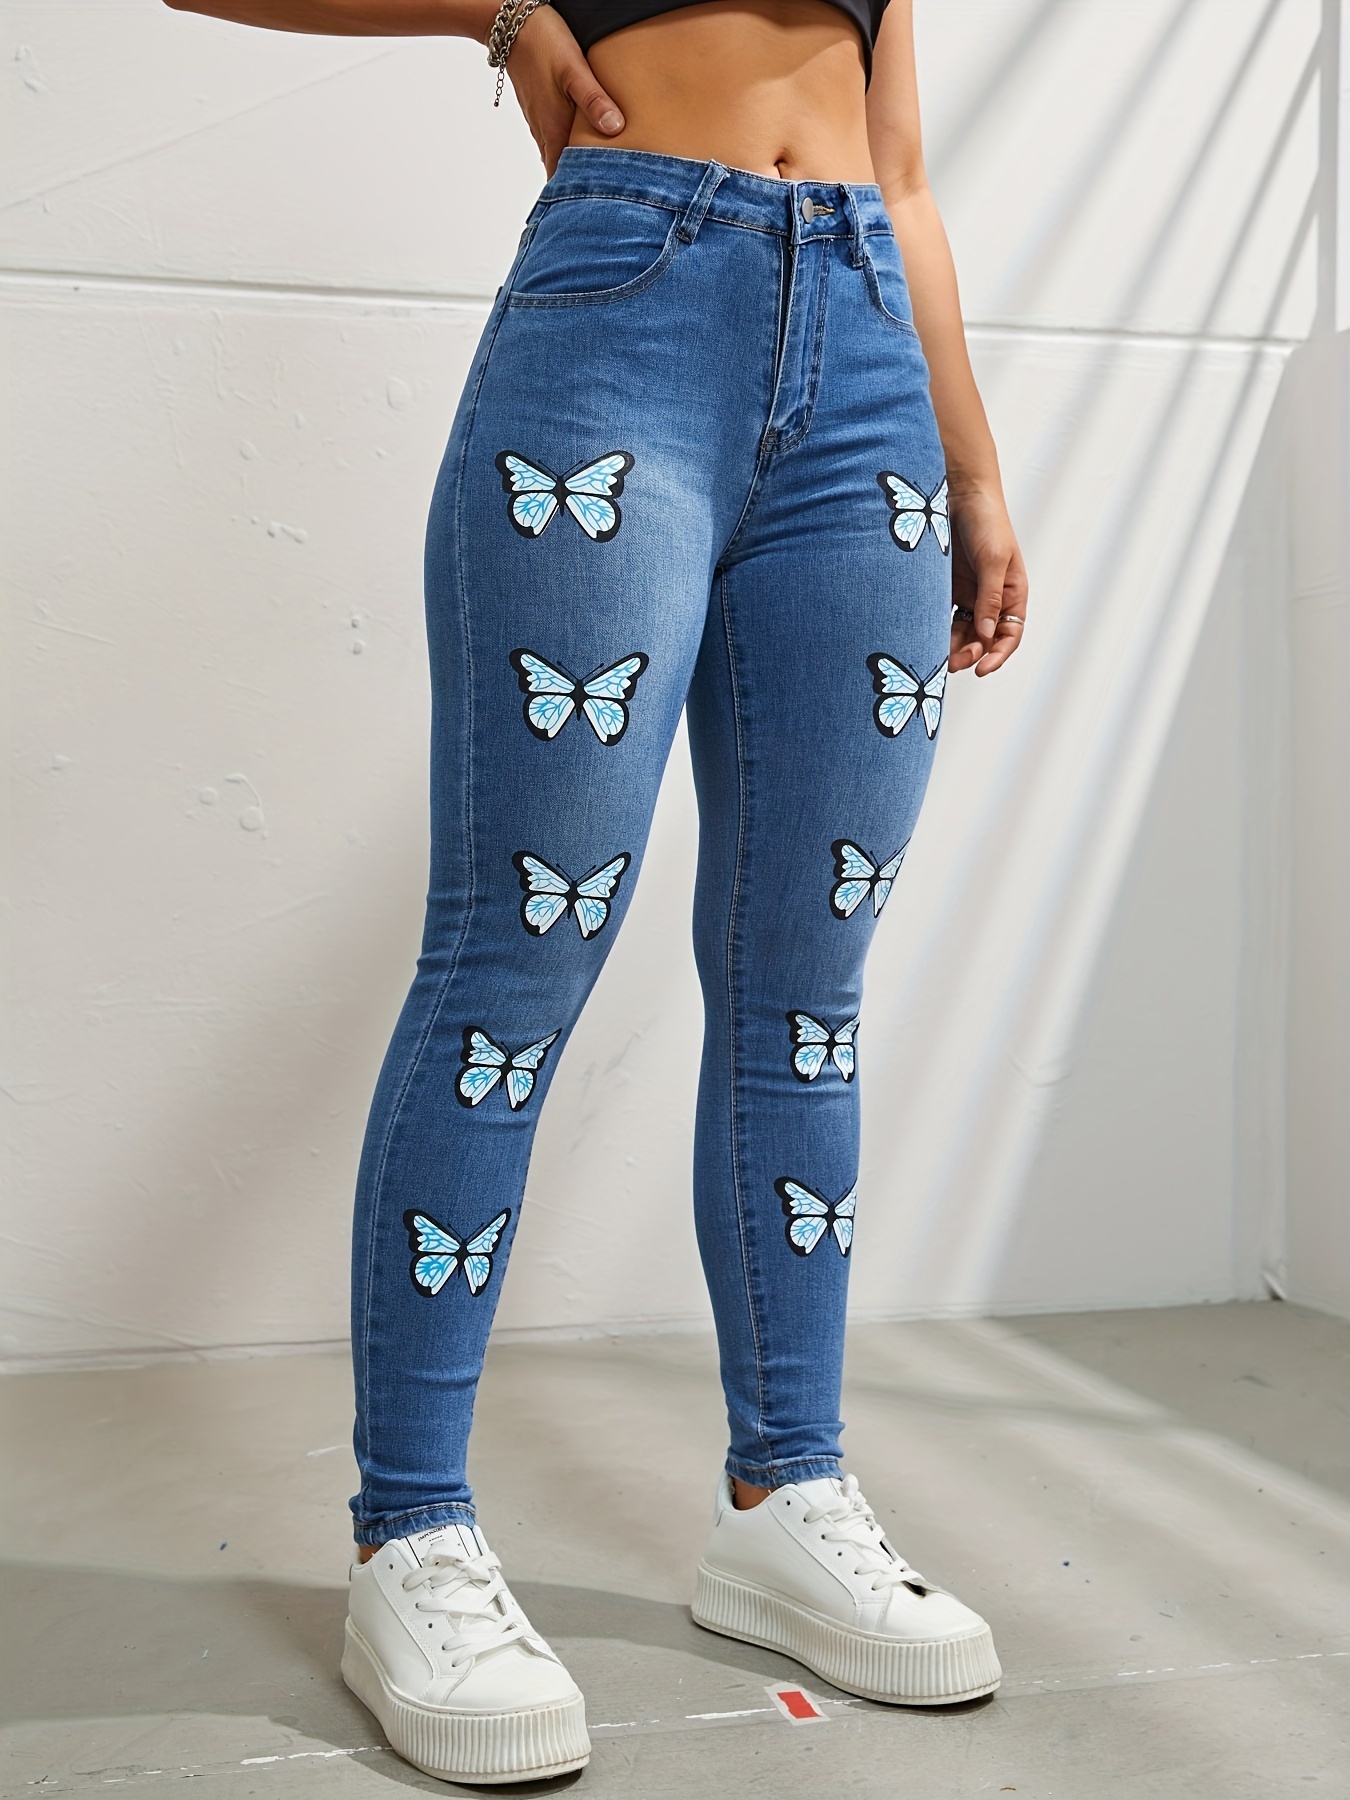 Loose Butterfly Printed Jeans for Women Casual Straight Pants High Waist  Denim Trousers Jeans,M